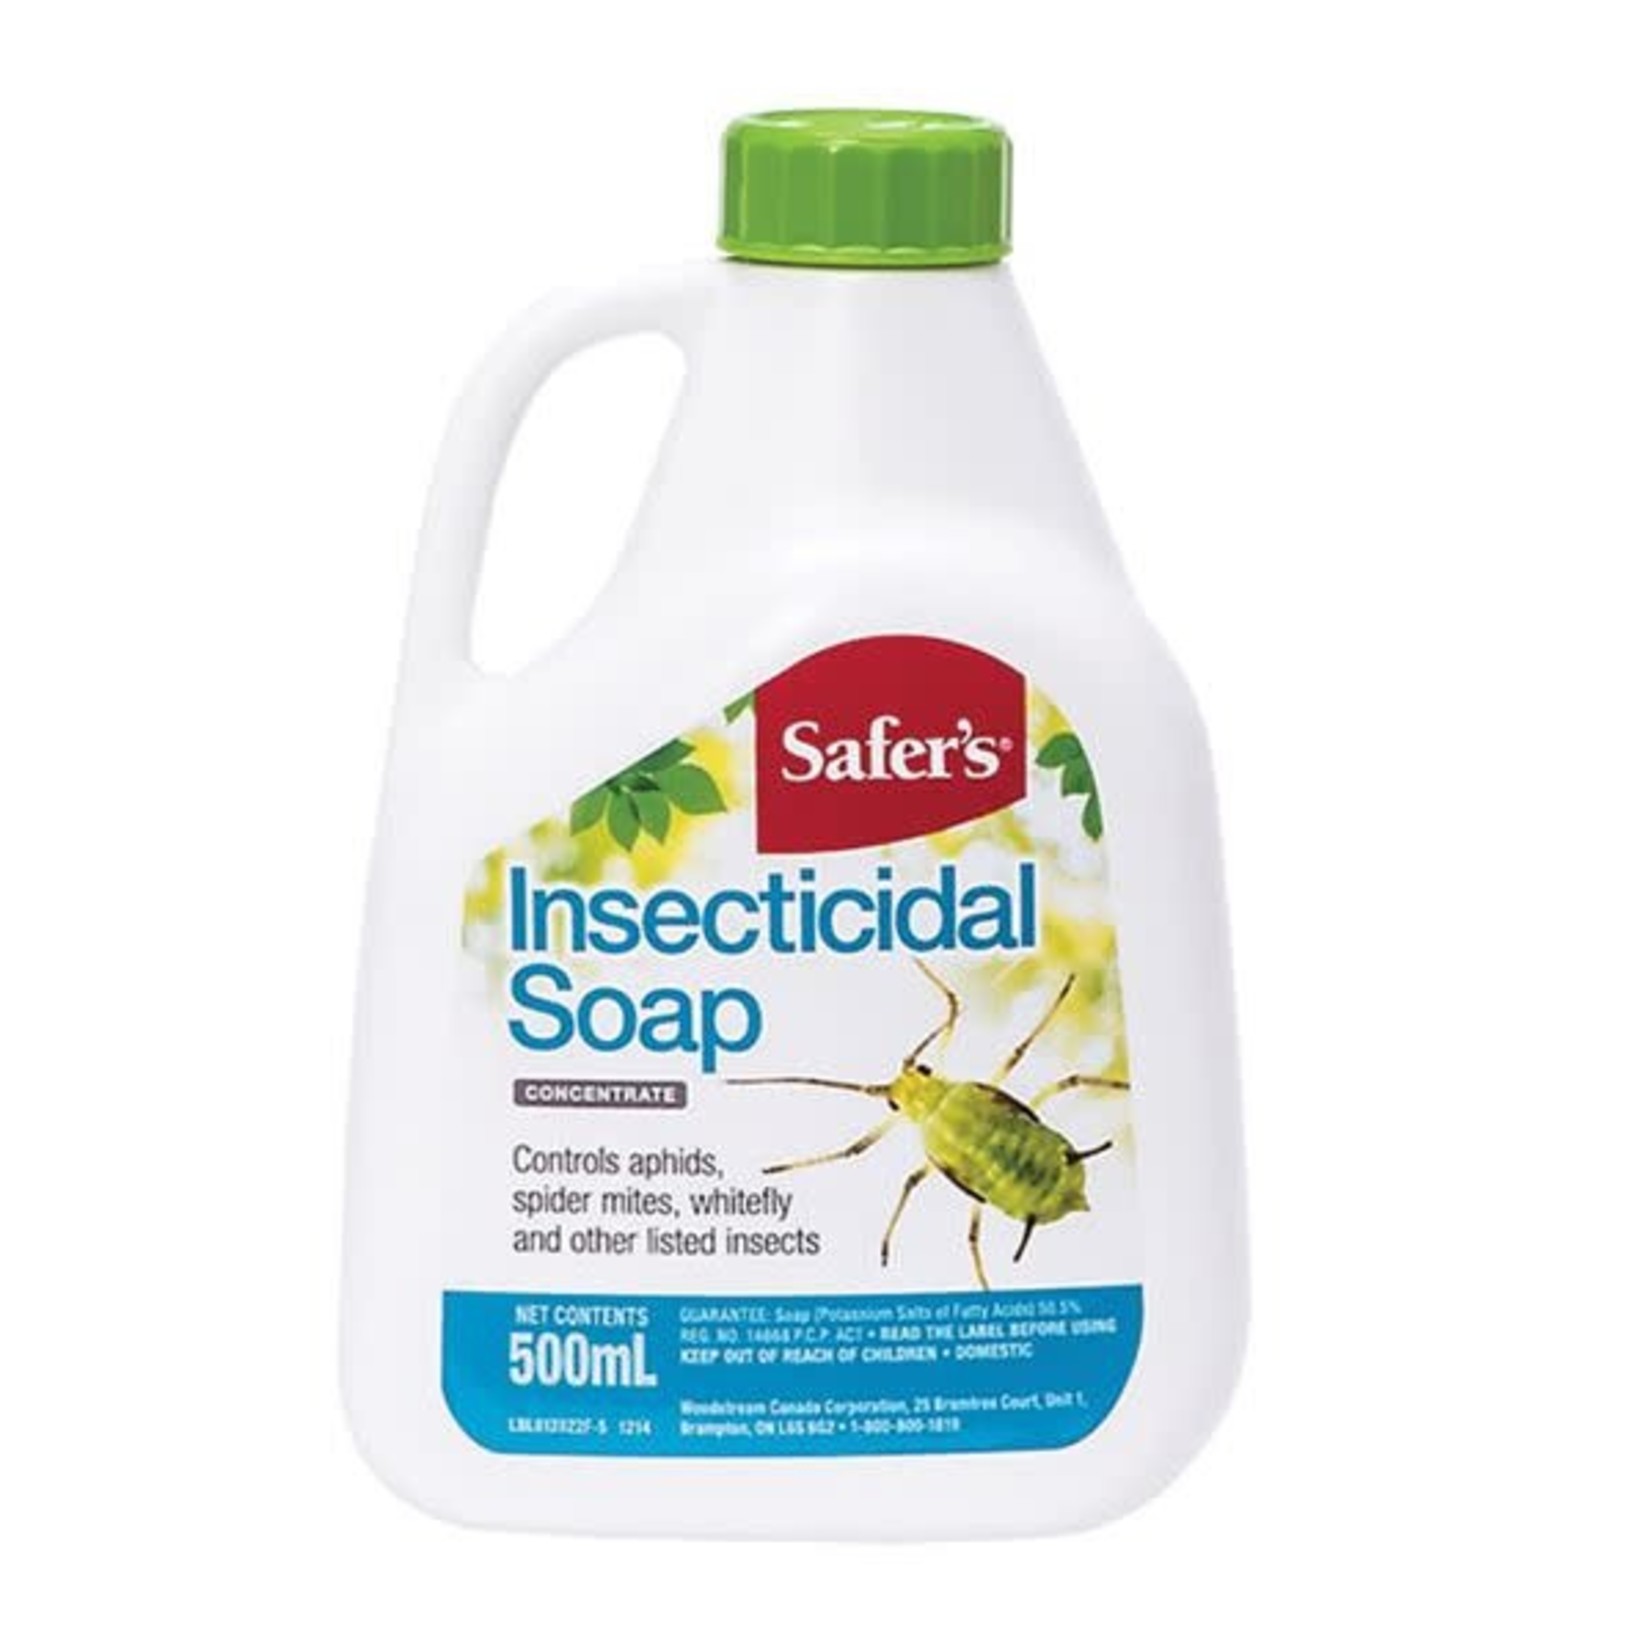 Safers Safers Insecticidal Soap Concentrate 500ml